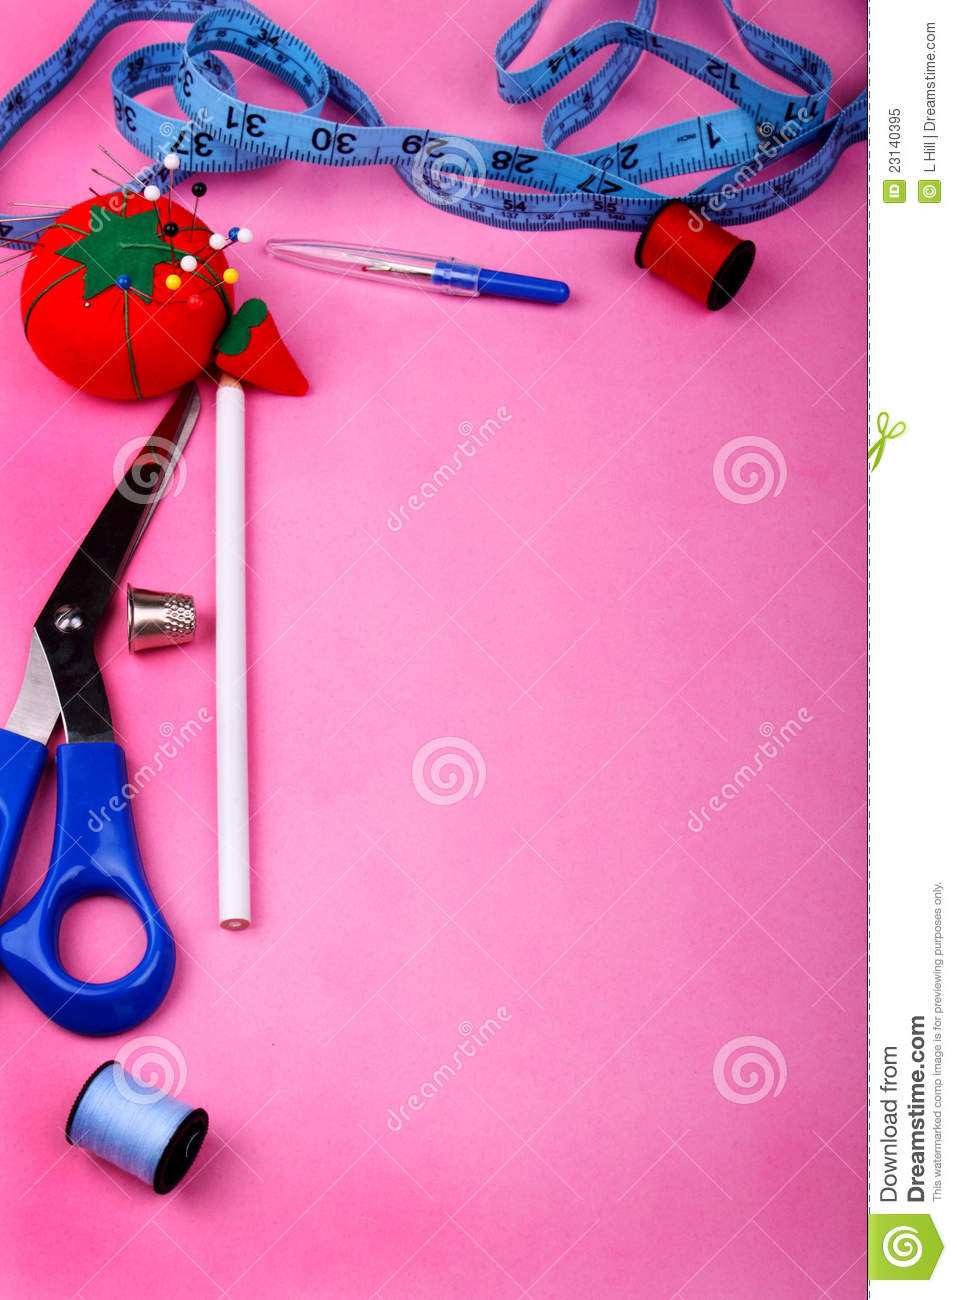 Sewing Border Clipart Vertical Border Of Sewing Tool